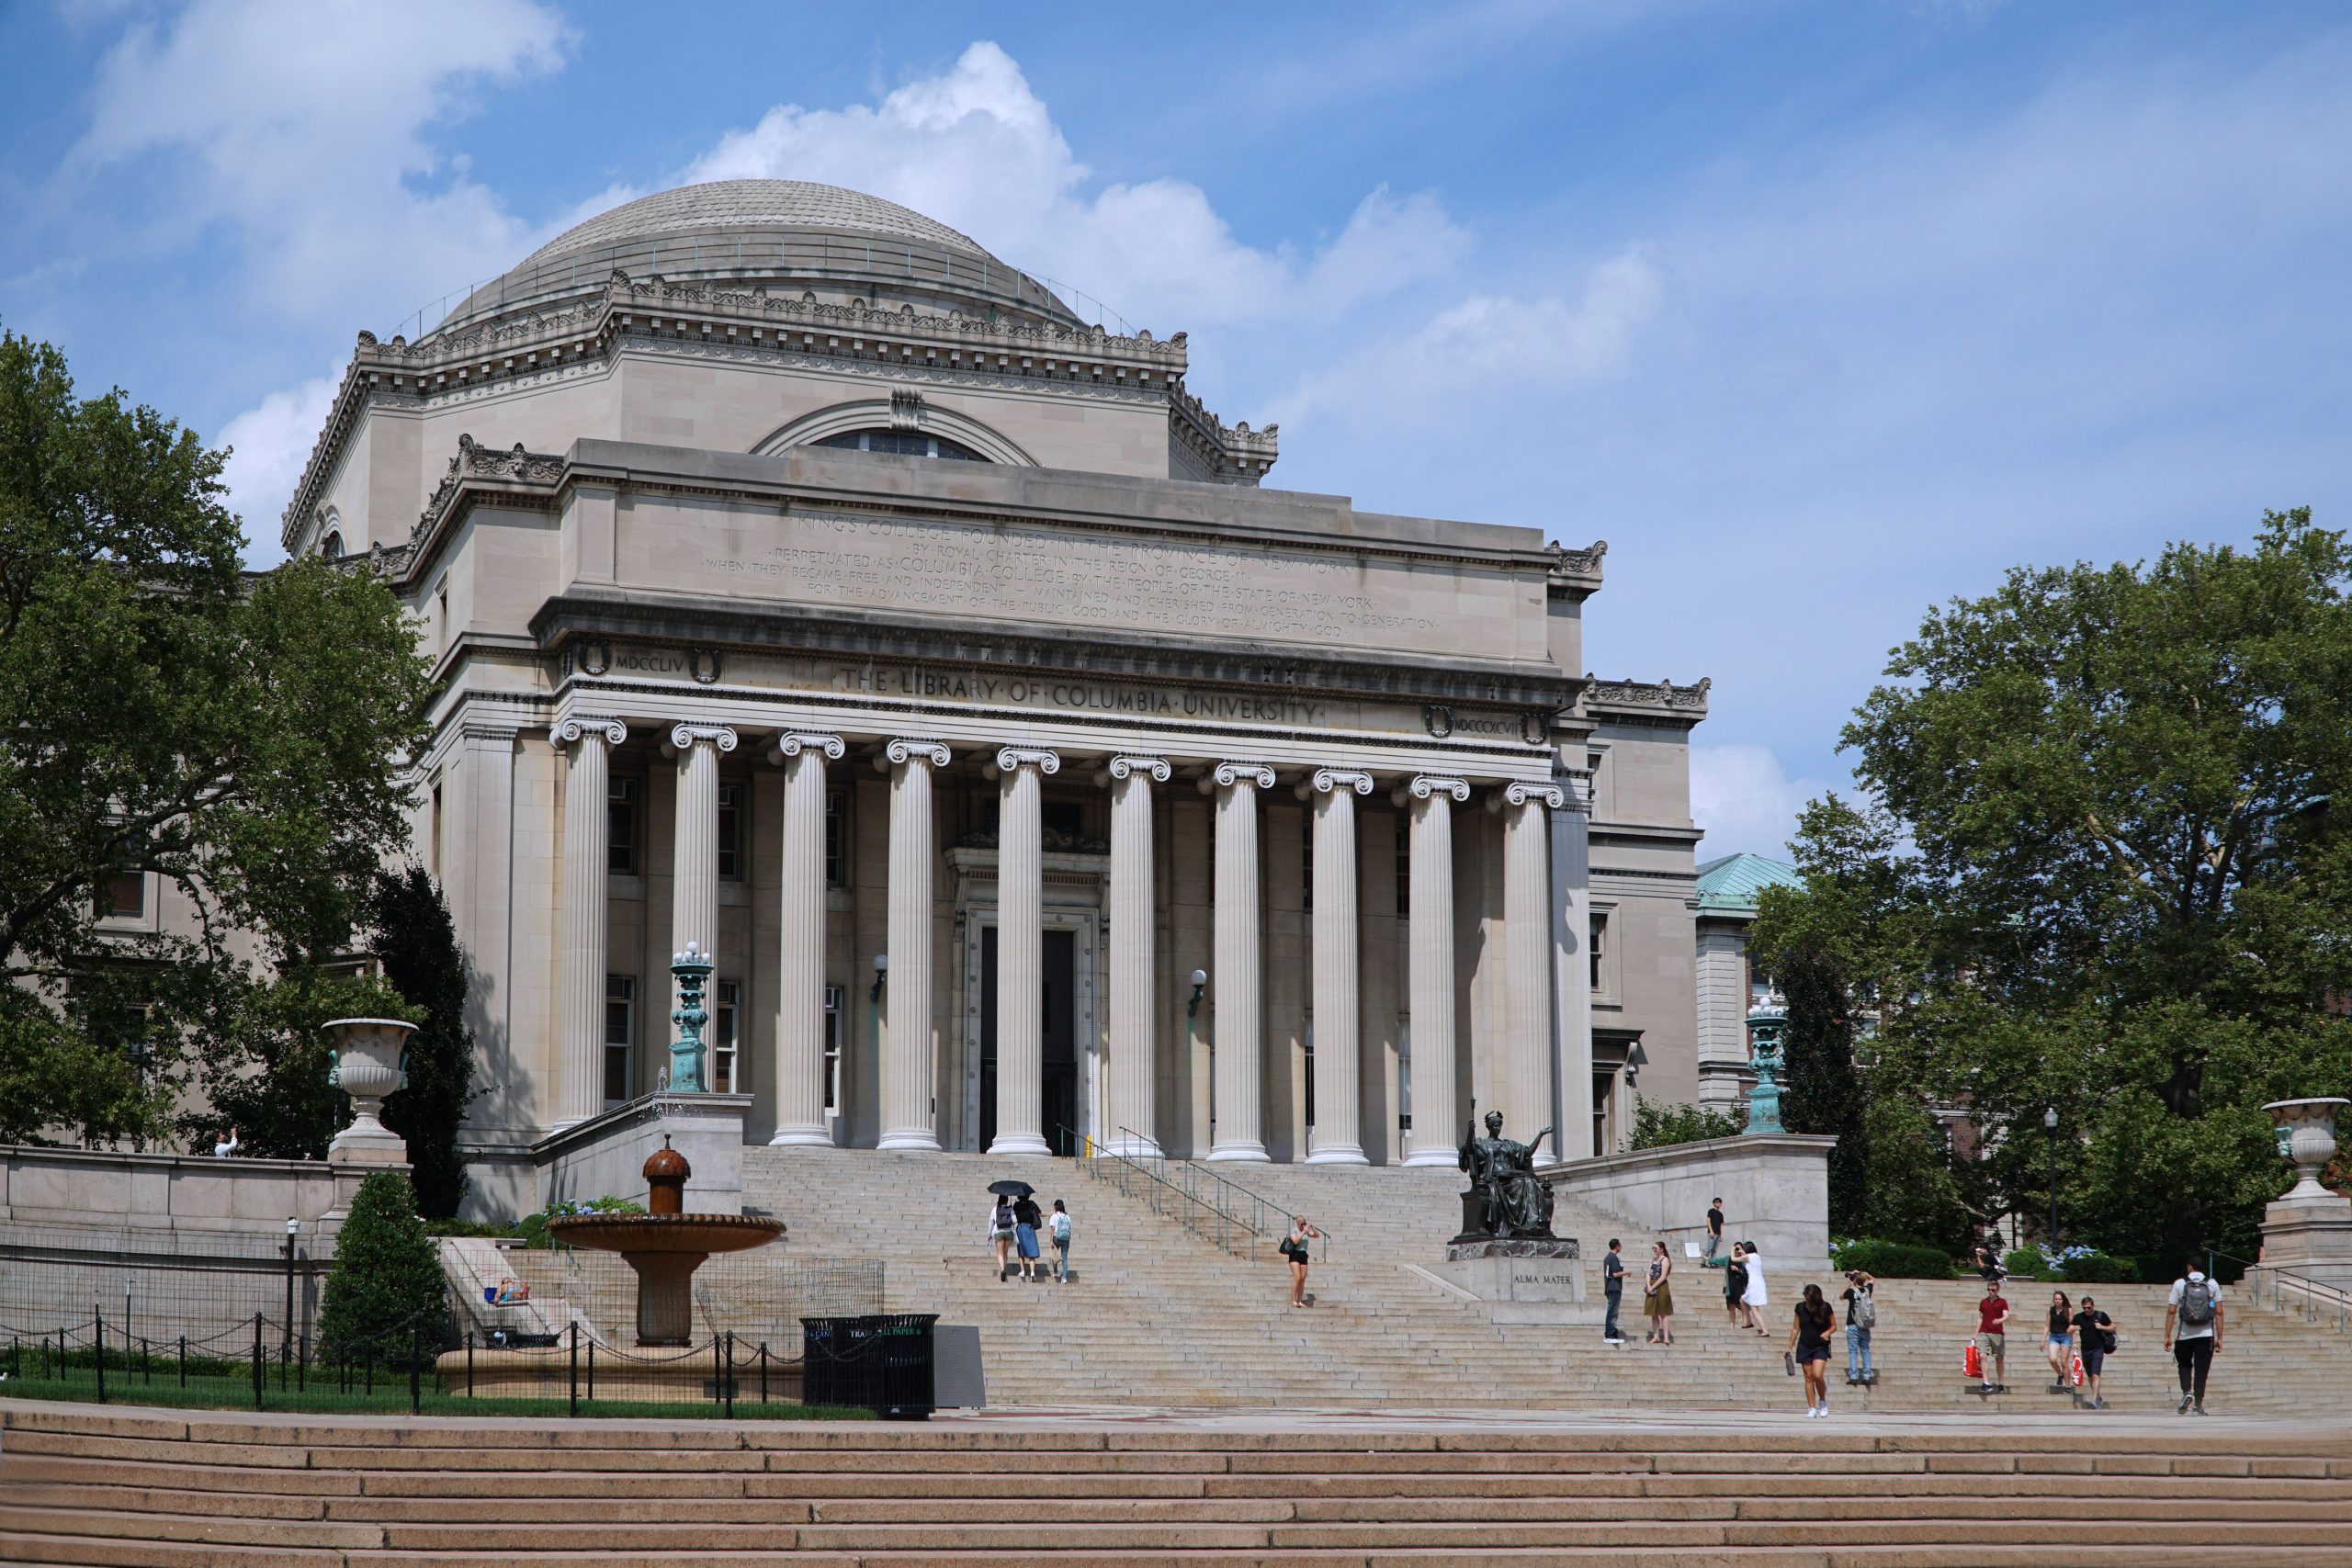 Defund Columbia, Yale, and Colleges that Tolerate Jew Hatred